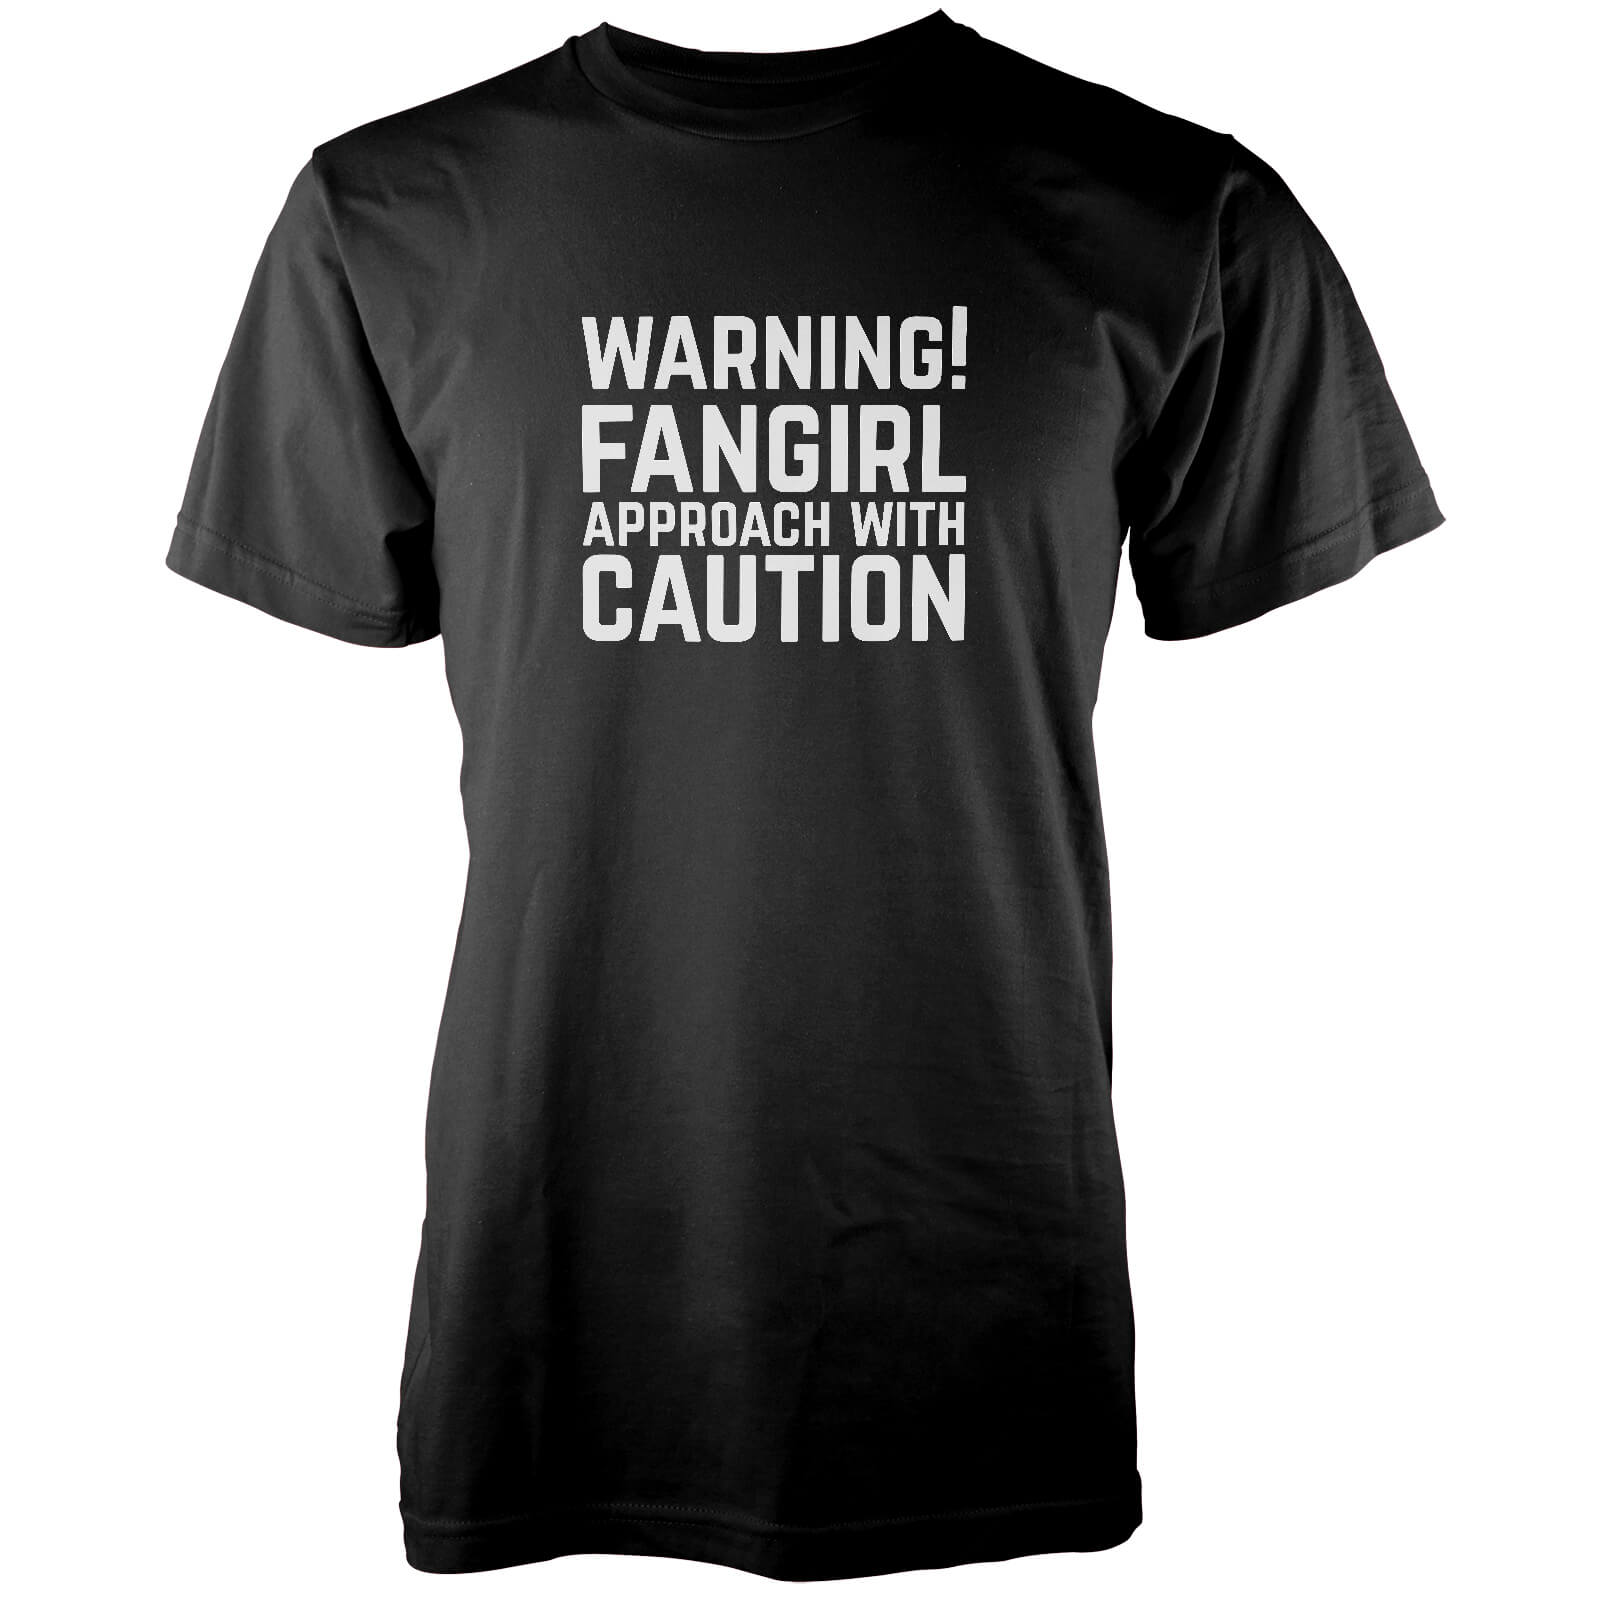 Warning! Fangirl Approach With Caution Black T-Shirt - M - Black